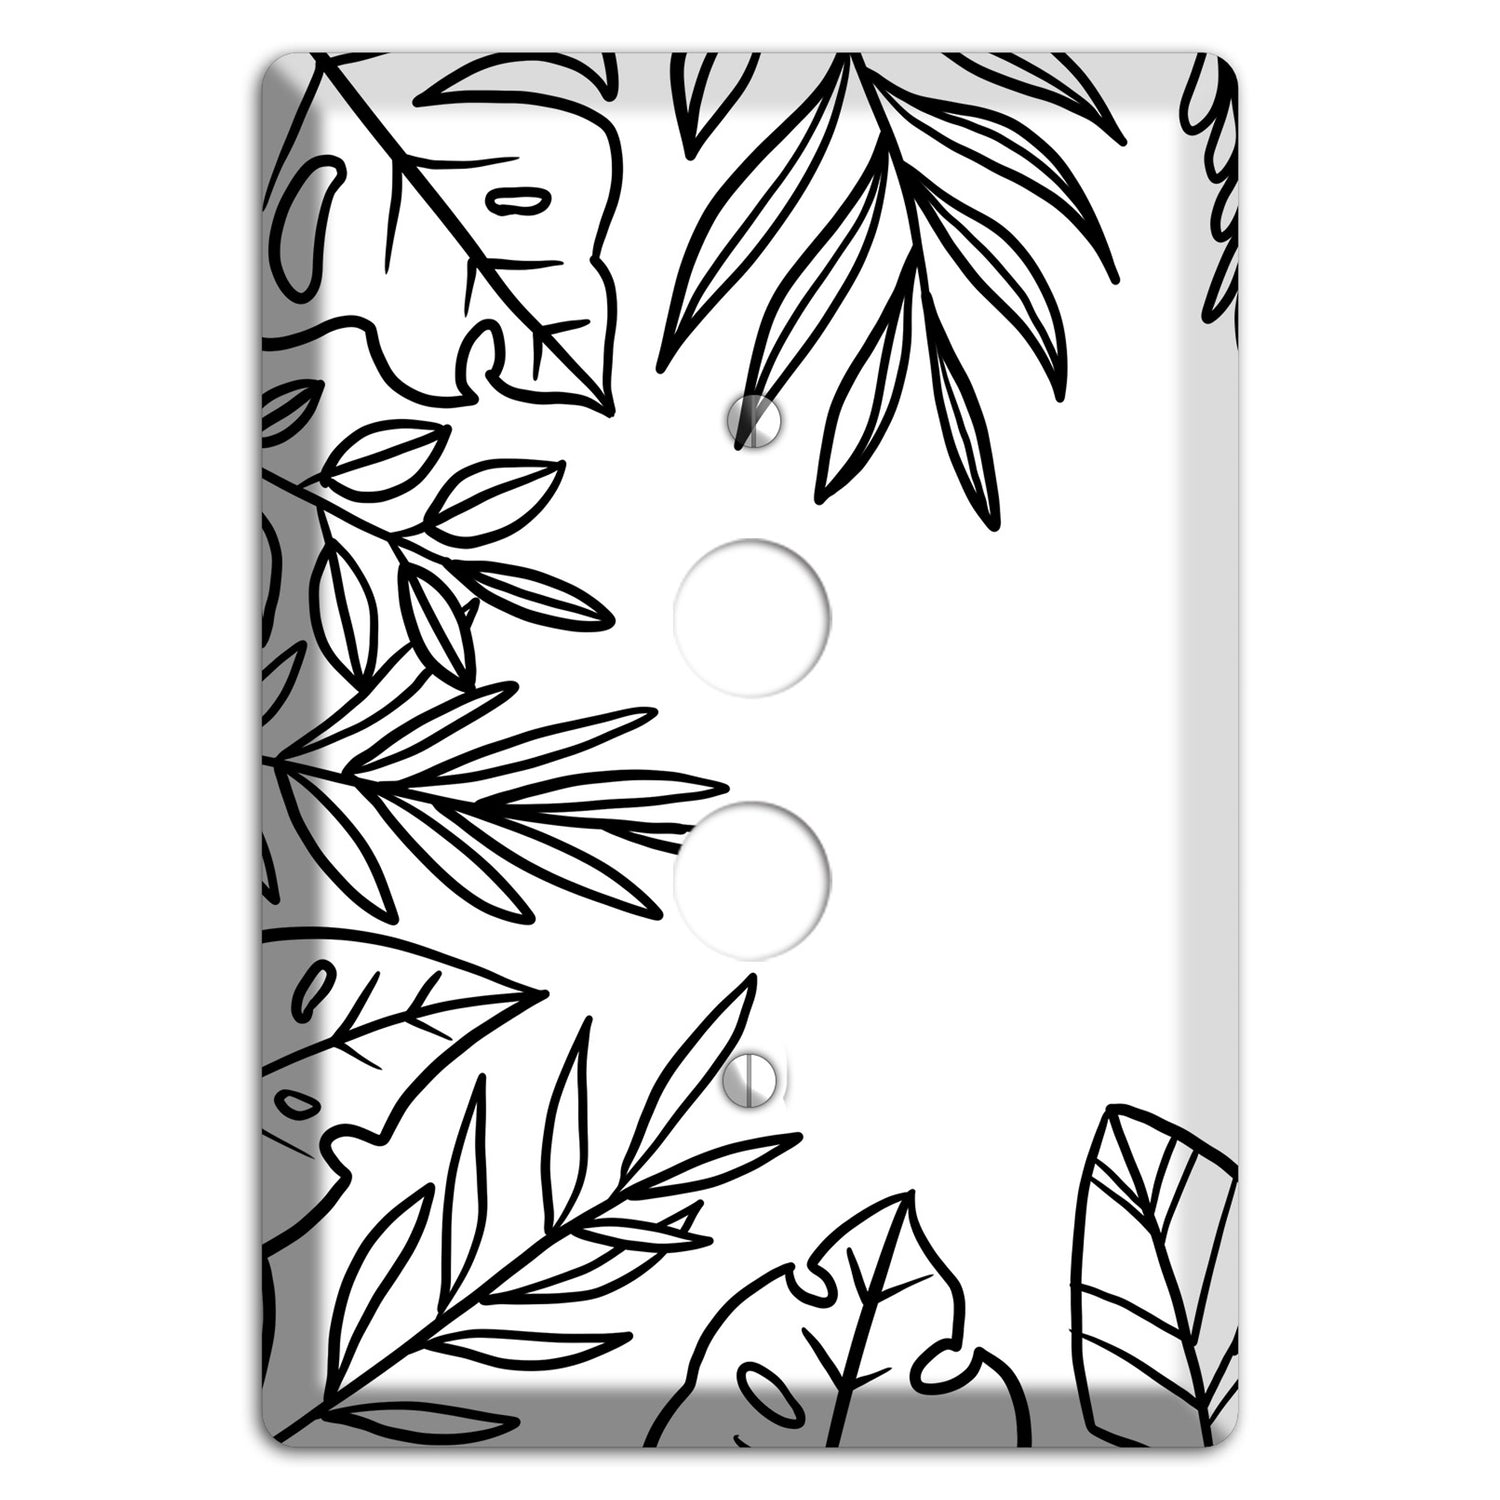 Hand-Drawn Leaves 4 1 Pushbutton Wallplate